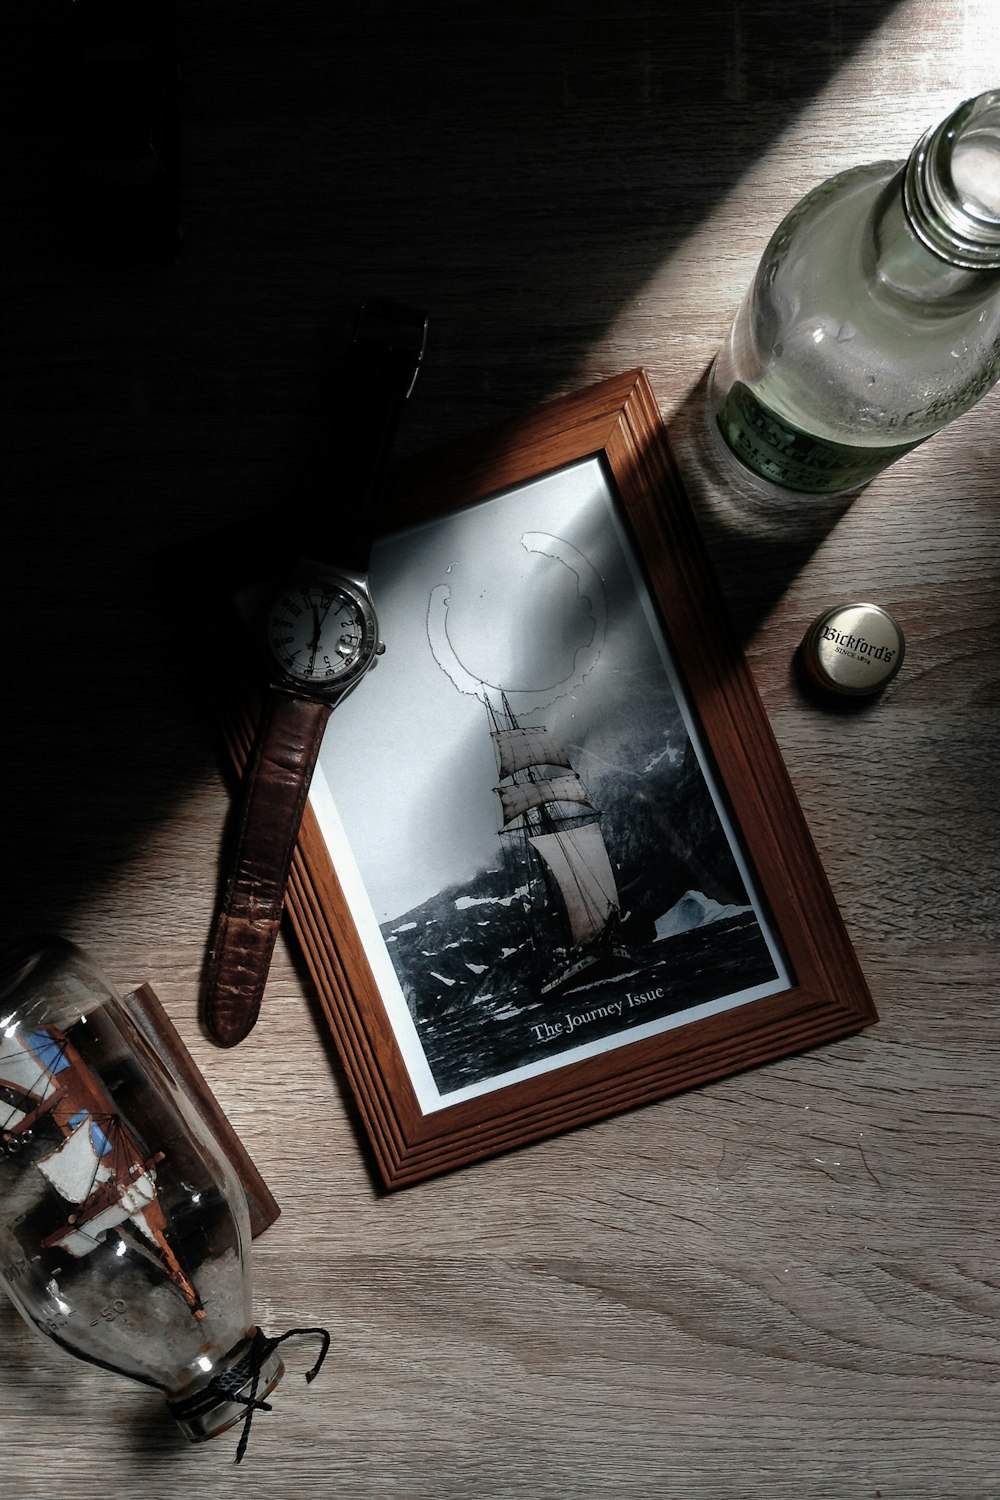 analog watch near photo frame and glass bottle